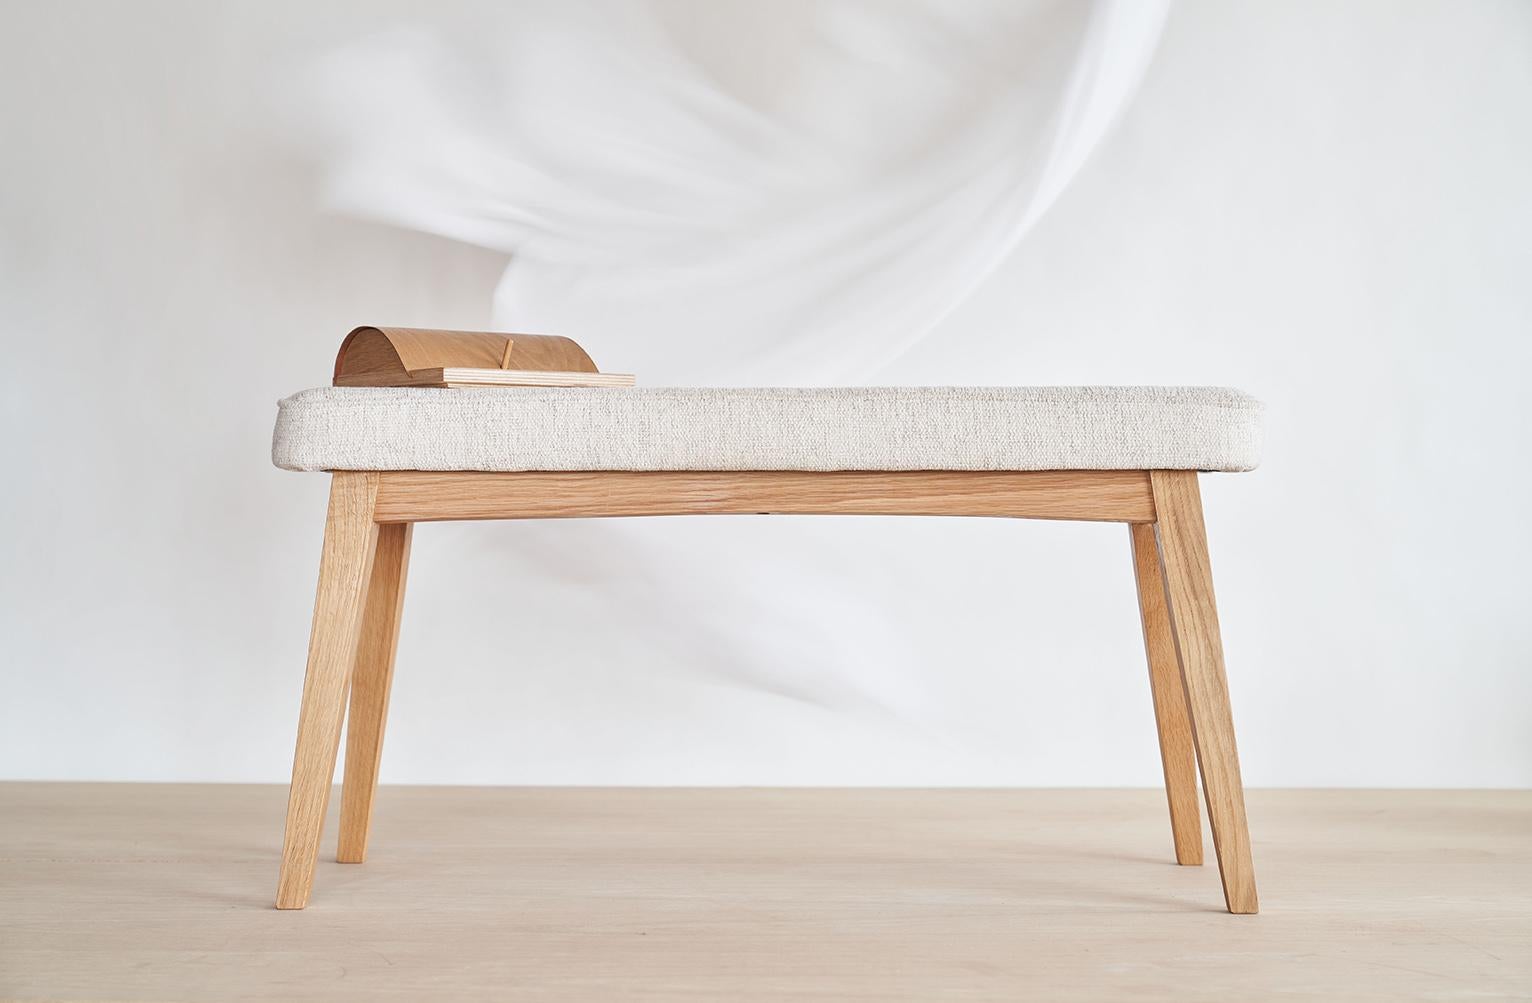 Classic bench by Jean-Baptiste Van den Heede
Dimensions: L 87 x D 29 x H 45 cm
Materials: oak, textile.
Also available: other finishes and woods available.

Upholstered bench in oak, walnut or other woods on request. A practical piece of